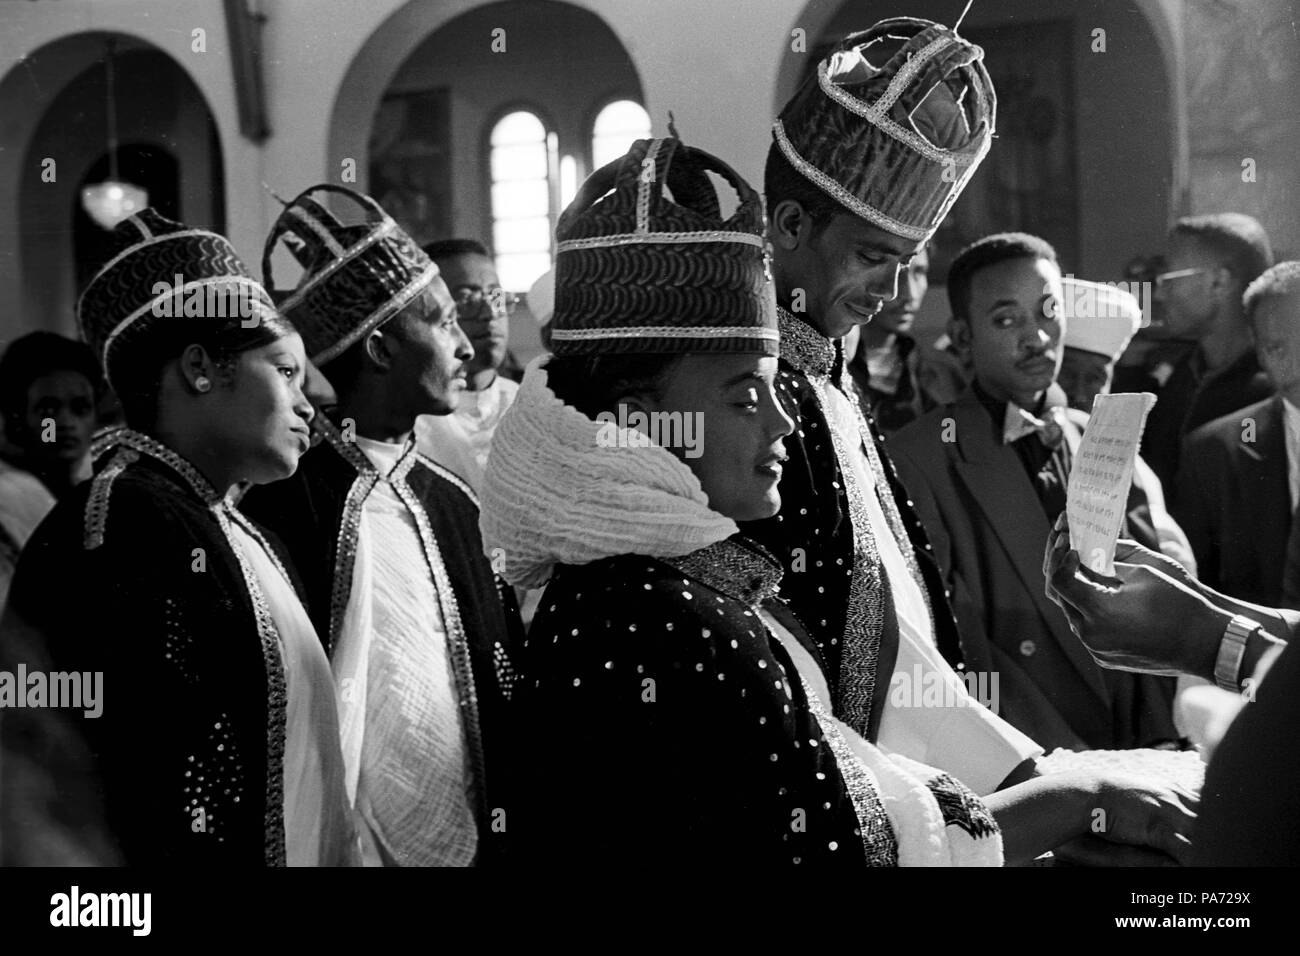 Asmara, Eritrea, Eritrea. 2nd Nov, 1999. At St. Mary's church in Asmara, couples exchange vows during an Orthodox service, marking the last opportunity to marry before the Christmas 40-day fast. Young women are marrying later and choosing their husbands, rather than submitting to the arranged marriages in adolescence, as tradition once required. Credit: Cheryl Hatch/ZUMAPRESS.com/Alamy Live News Stock Photo